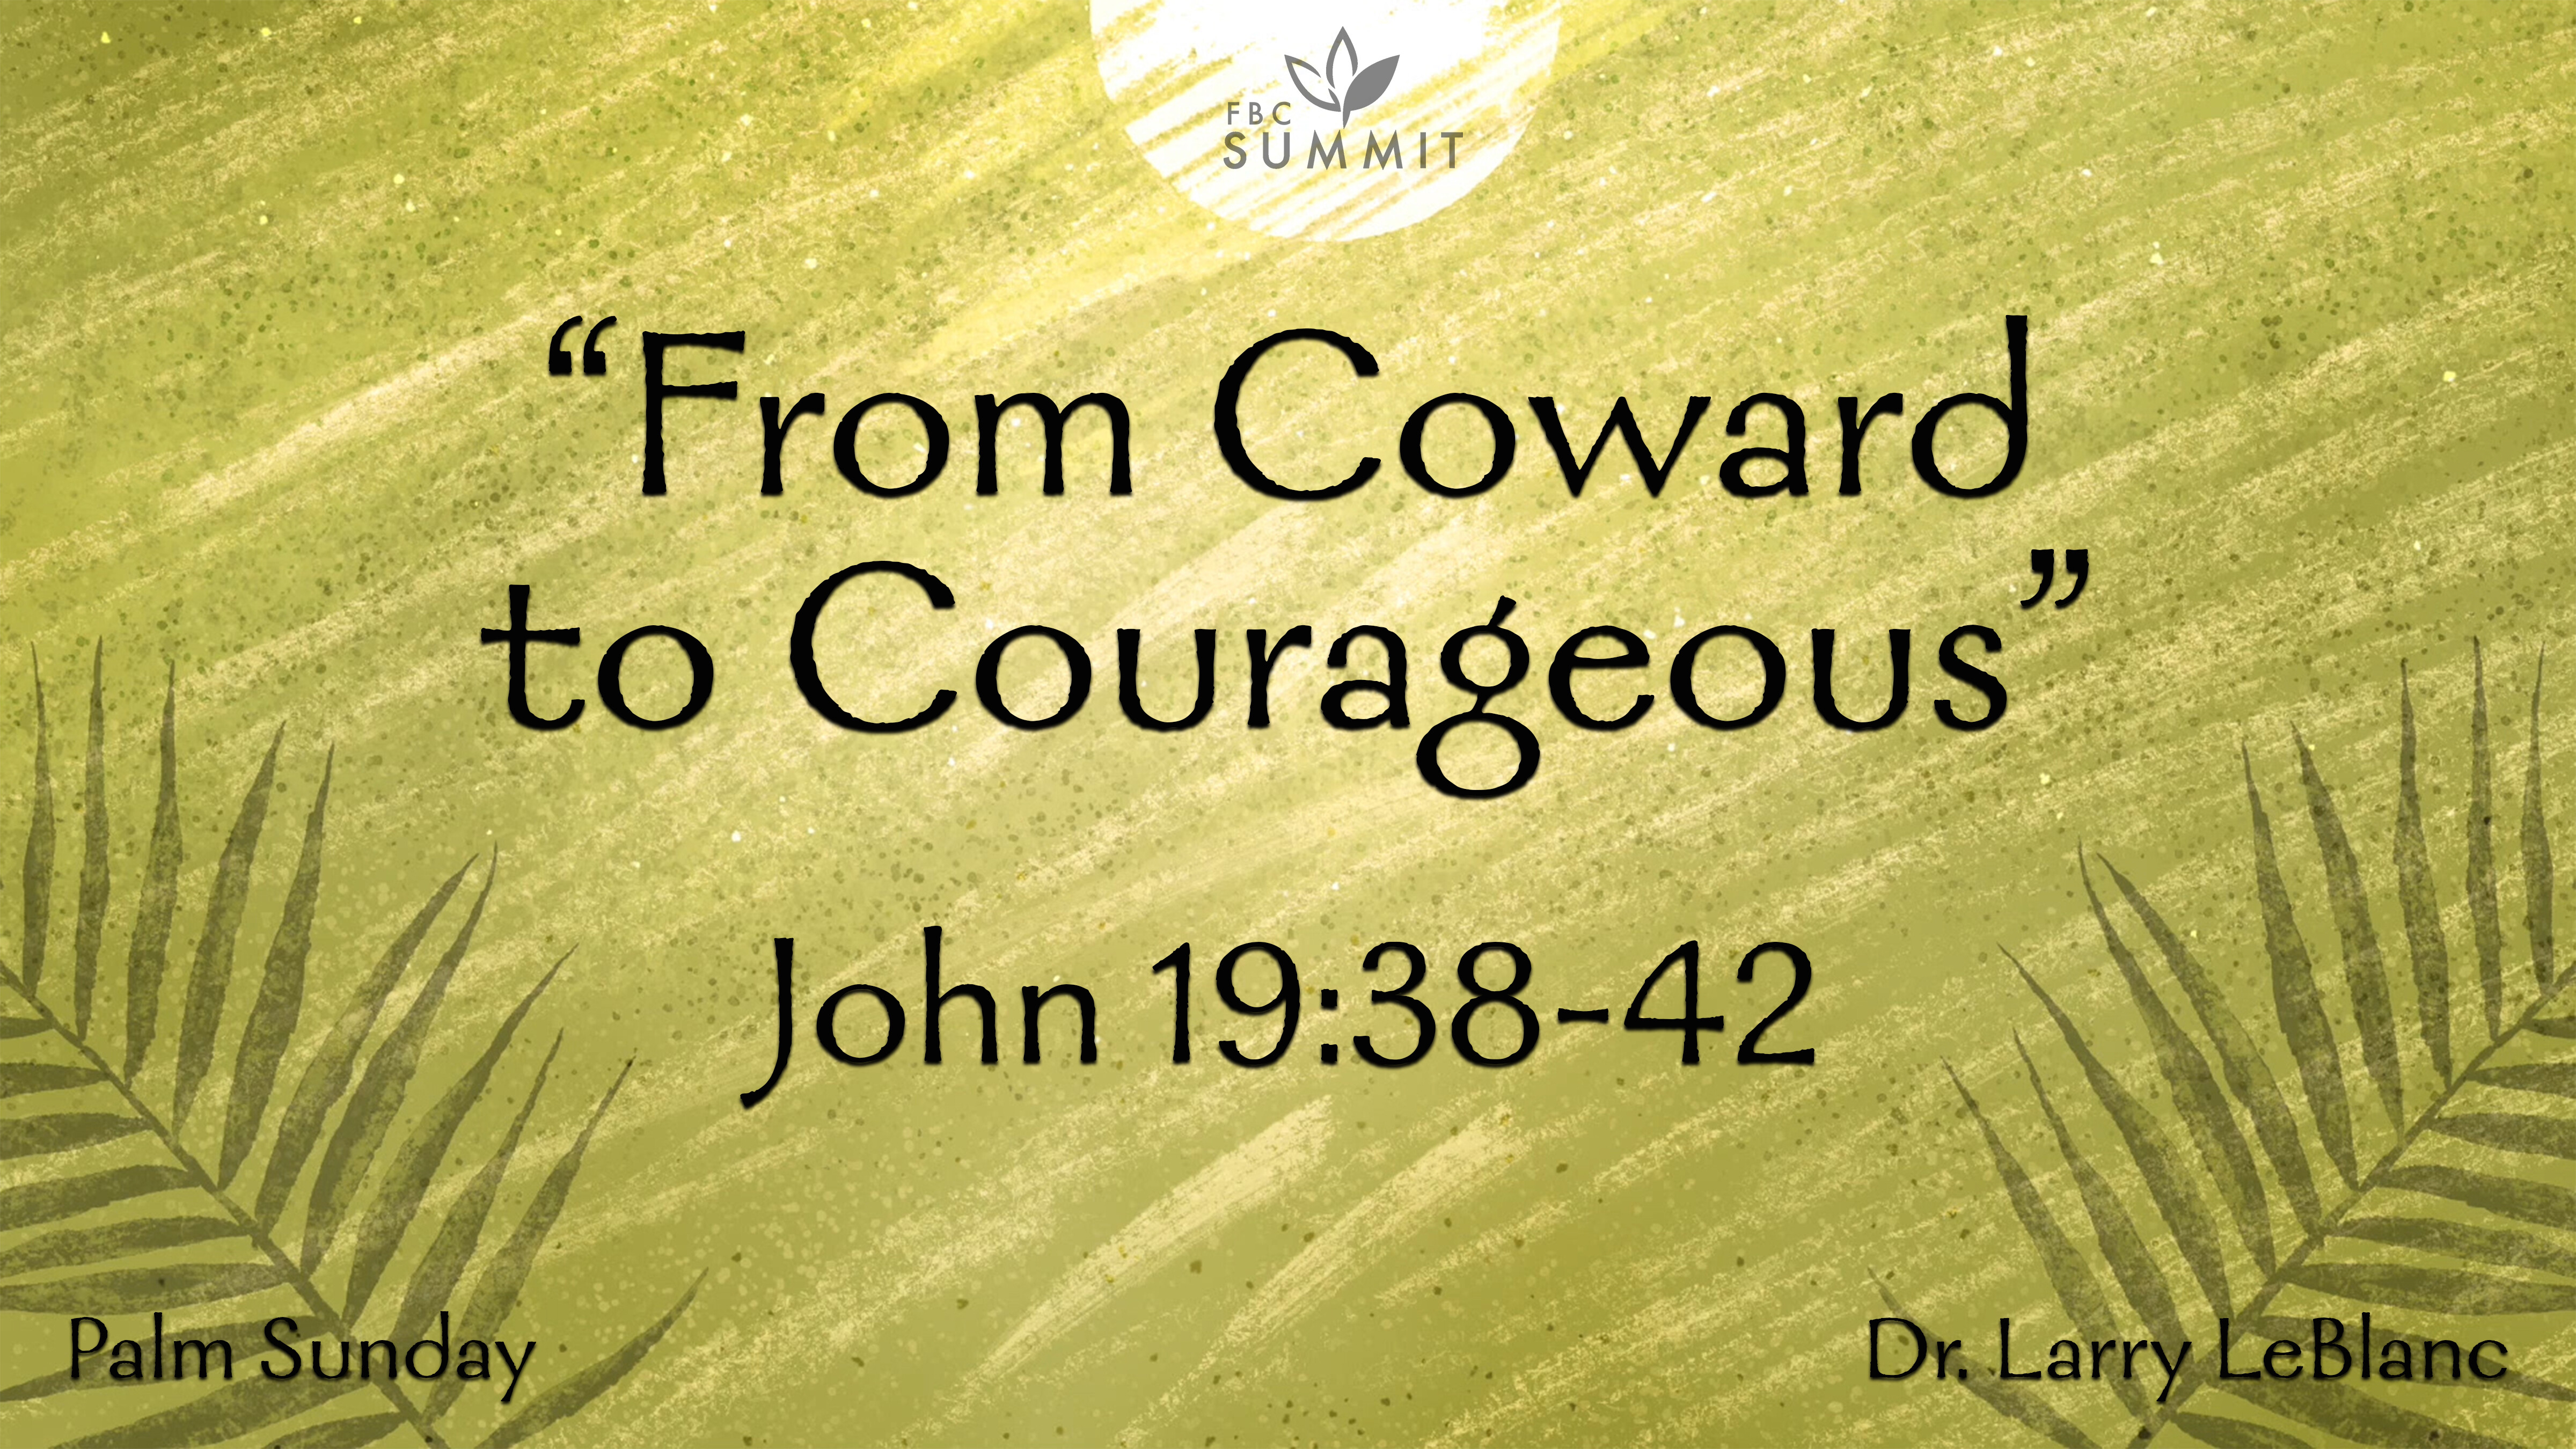 "From Coward to Courageous" John 19:38-42 // Dr. Larry LeBlanc